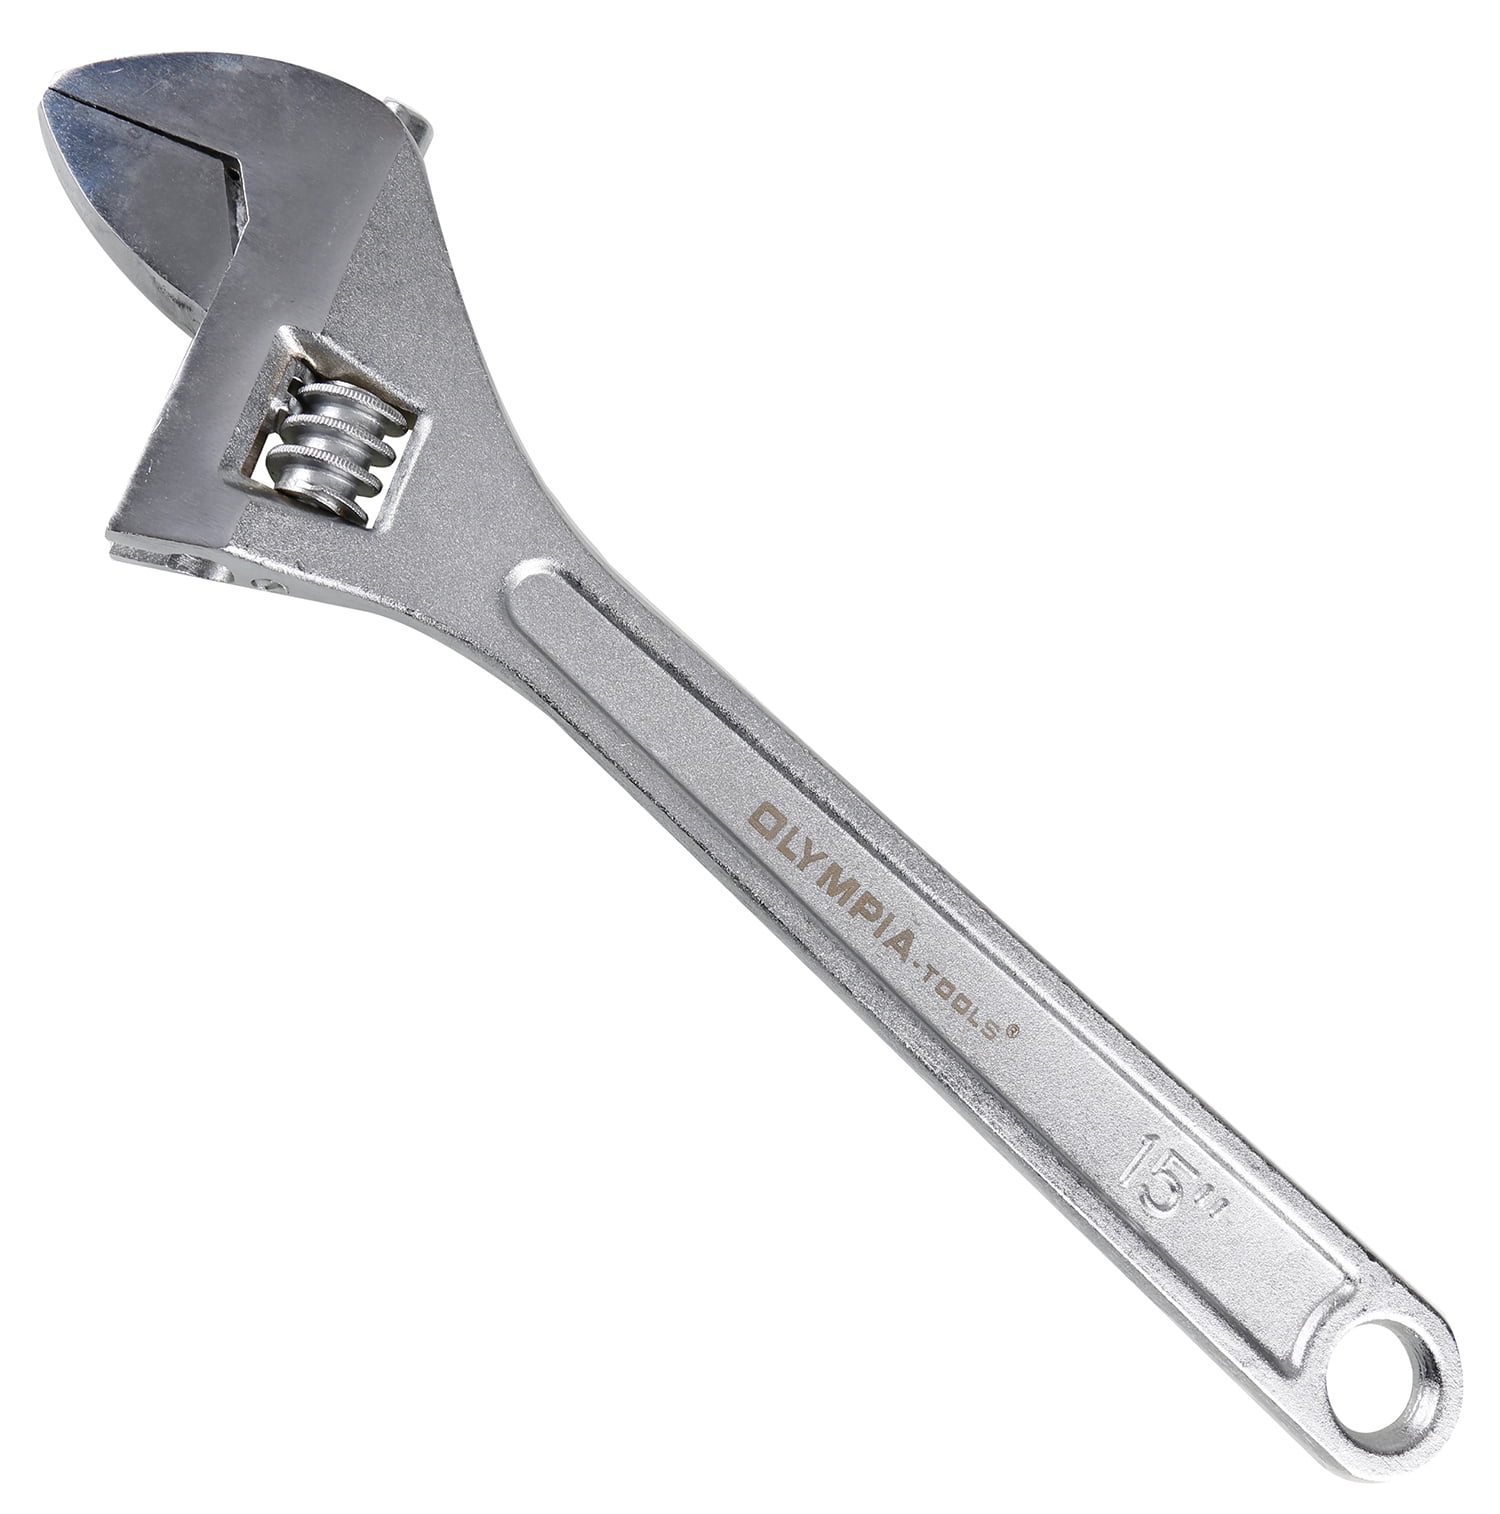 Jumbo 15" Inch 375mm Heavy Duty Adjustable Wrench Spanner Workshop Tool CT2337 